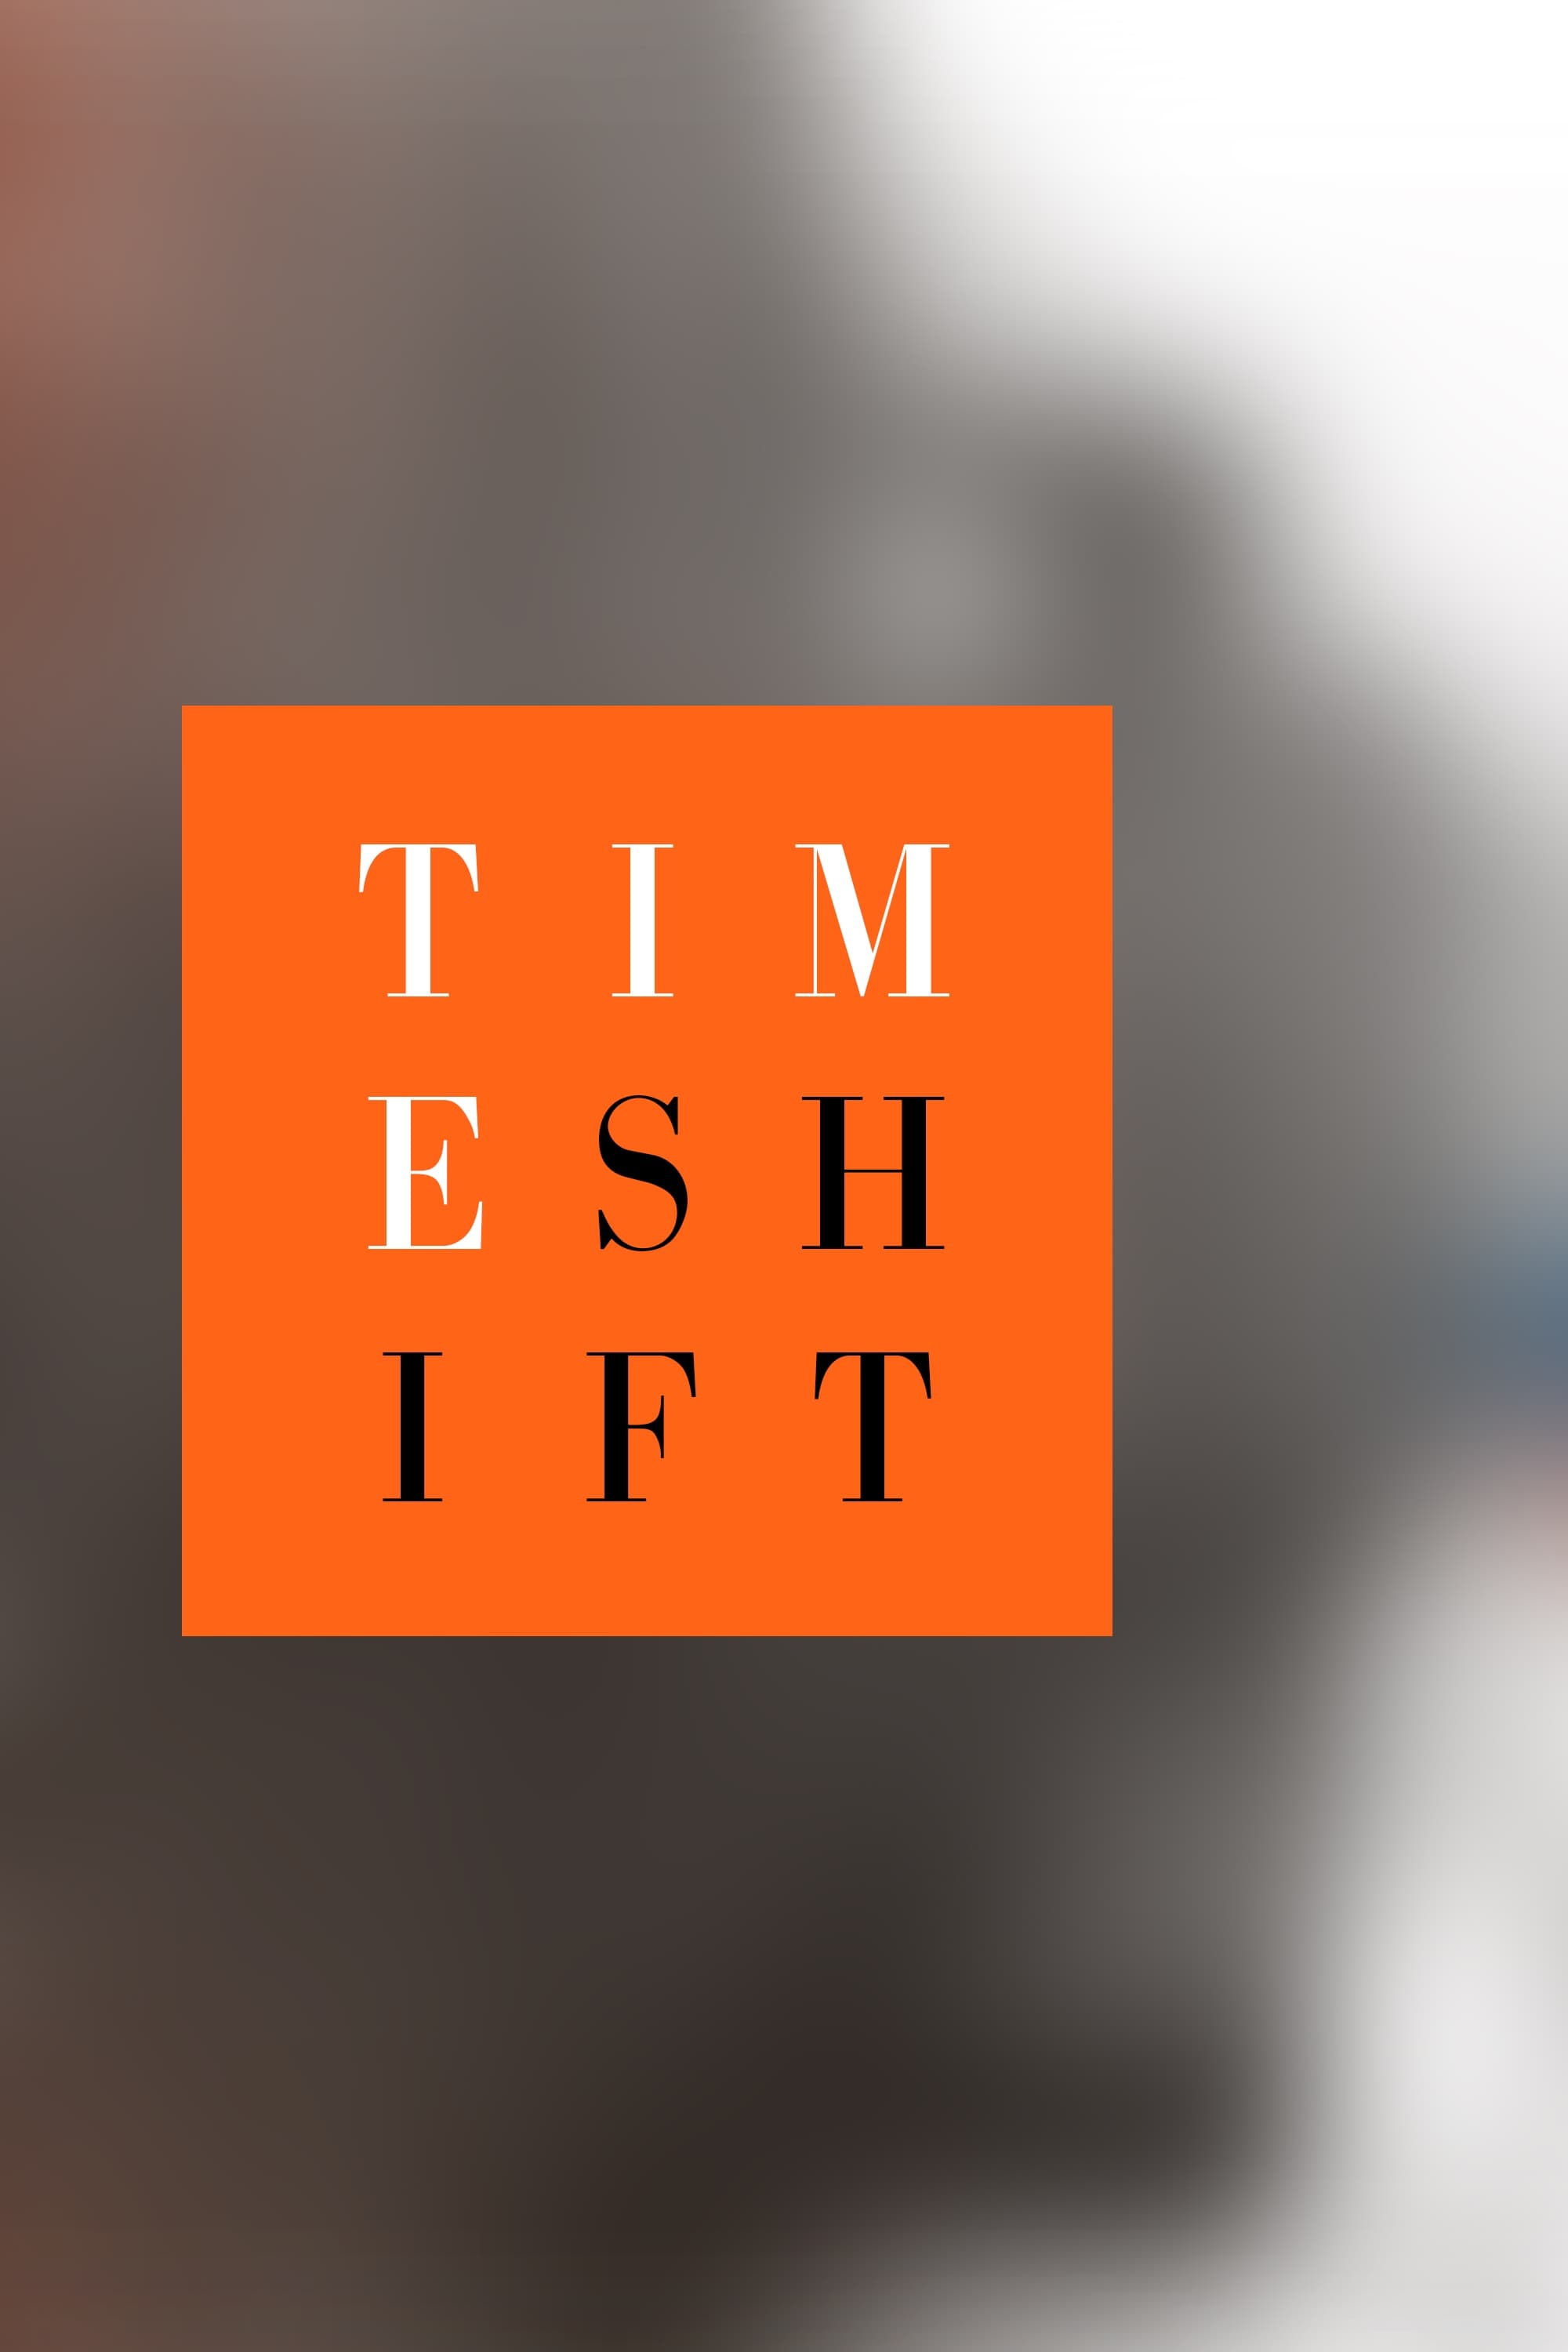 Timeshift TV Shows About Great Britain